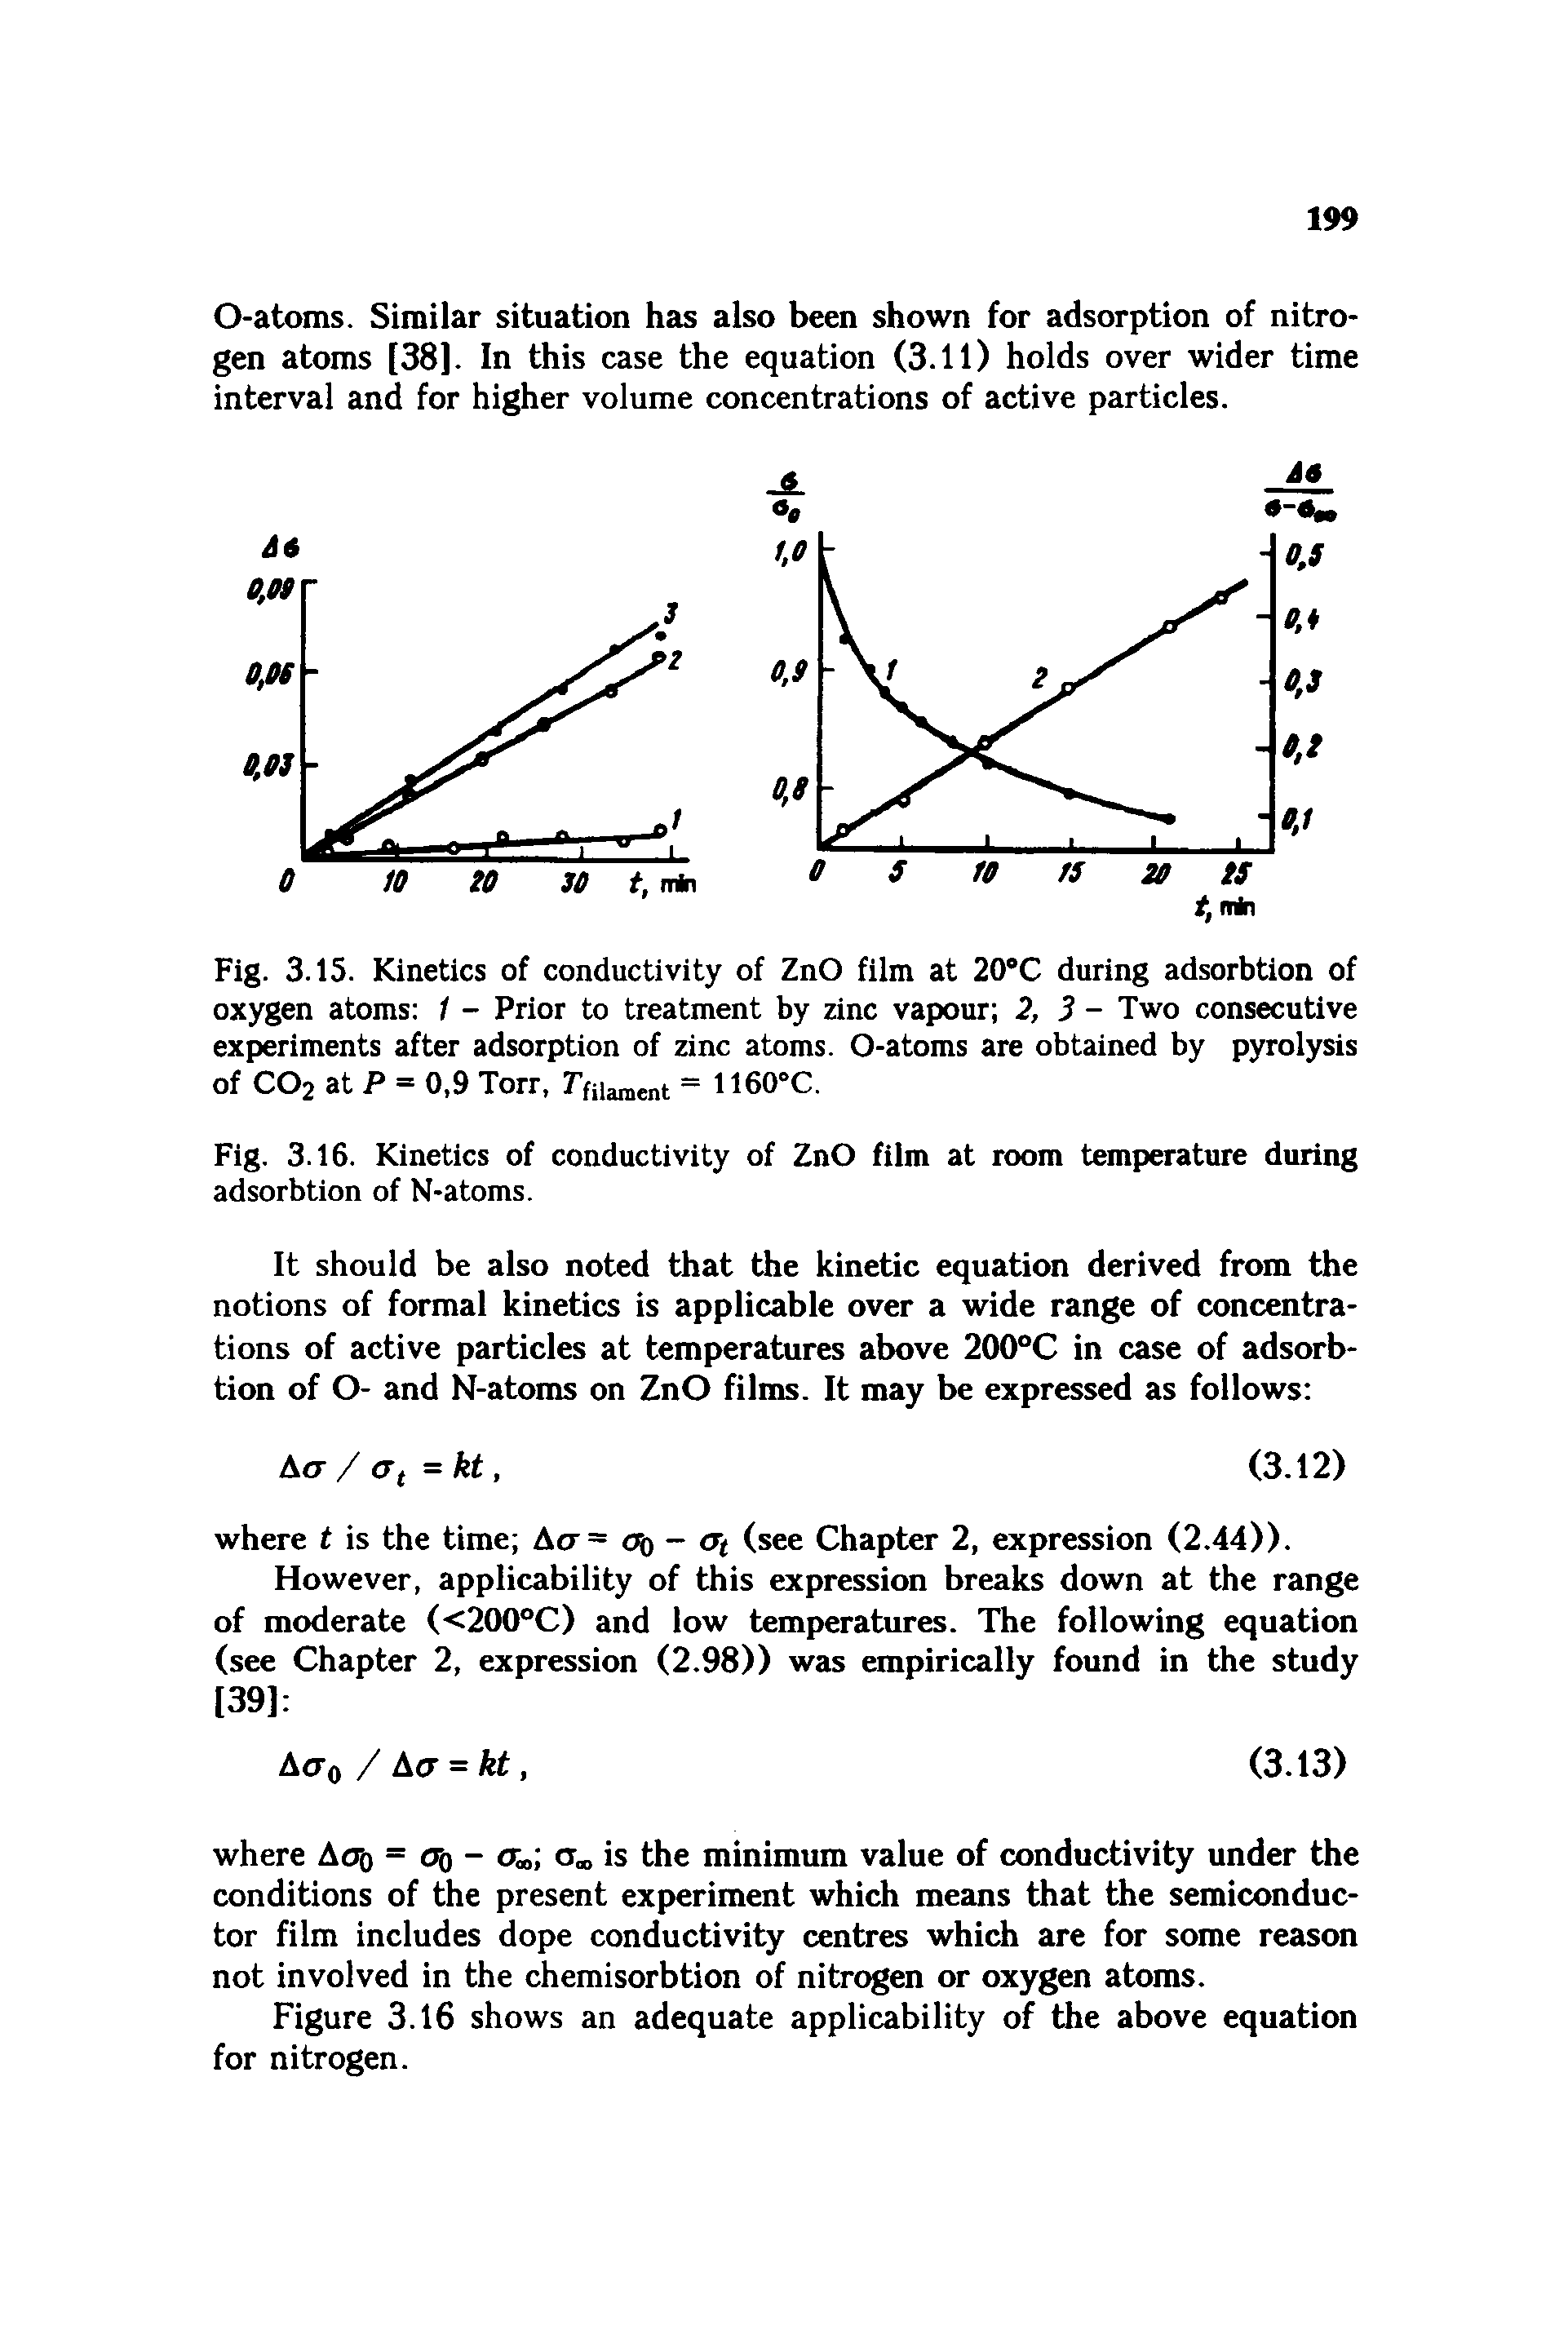 Fig. 3.15. Kinetics of conductivity of ZnO film at 20 C during adsorbtion of oxygen atoms 1 - Prior to treatment by zinc vapour 2, 3 - Two consecutive experiments after adsorption of zinc atoms. O-atoms are obtained by pyrolysis of CO2 at P = 0,9 Torr, Tfiiament = lieO -C.